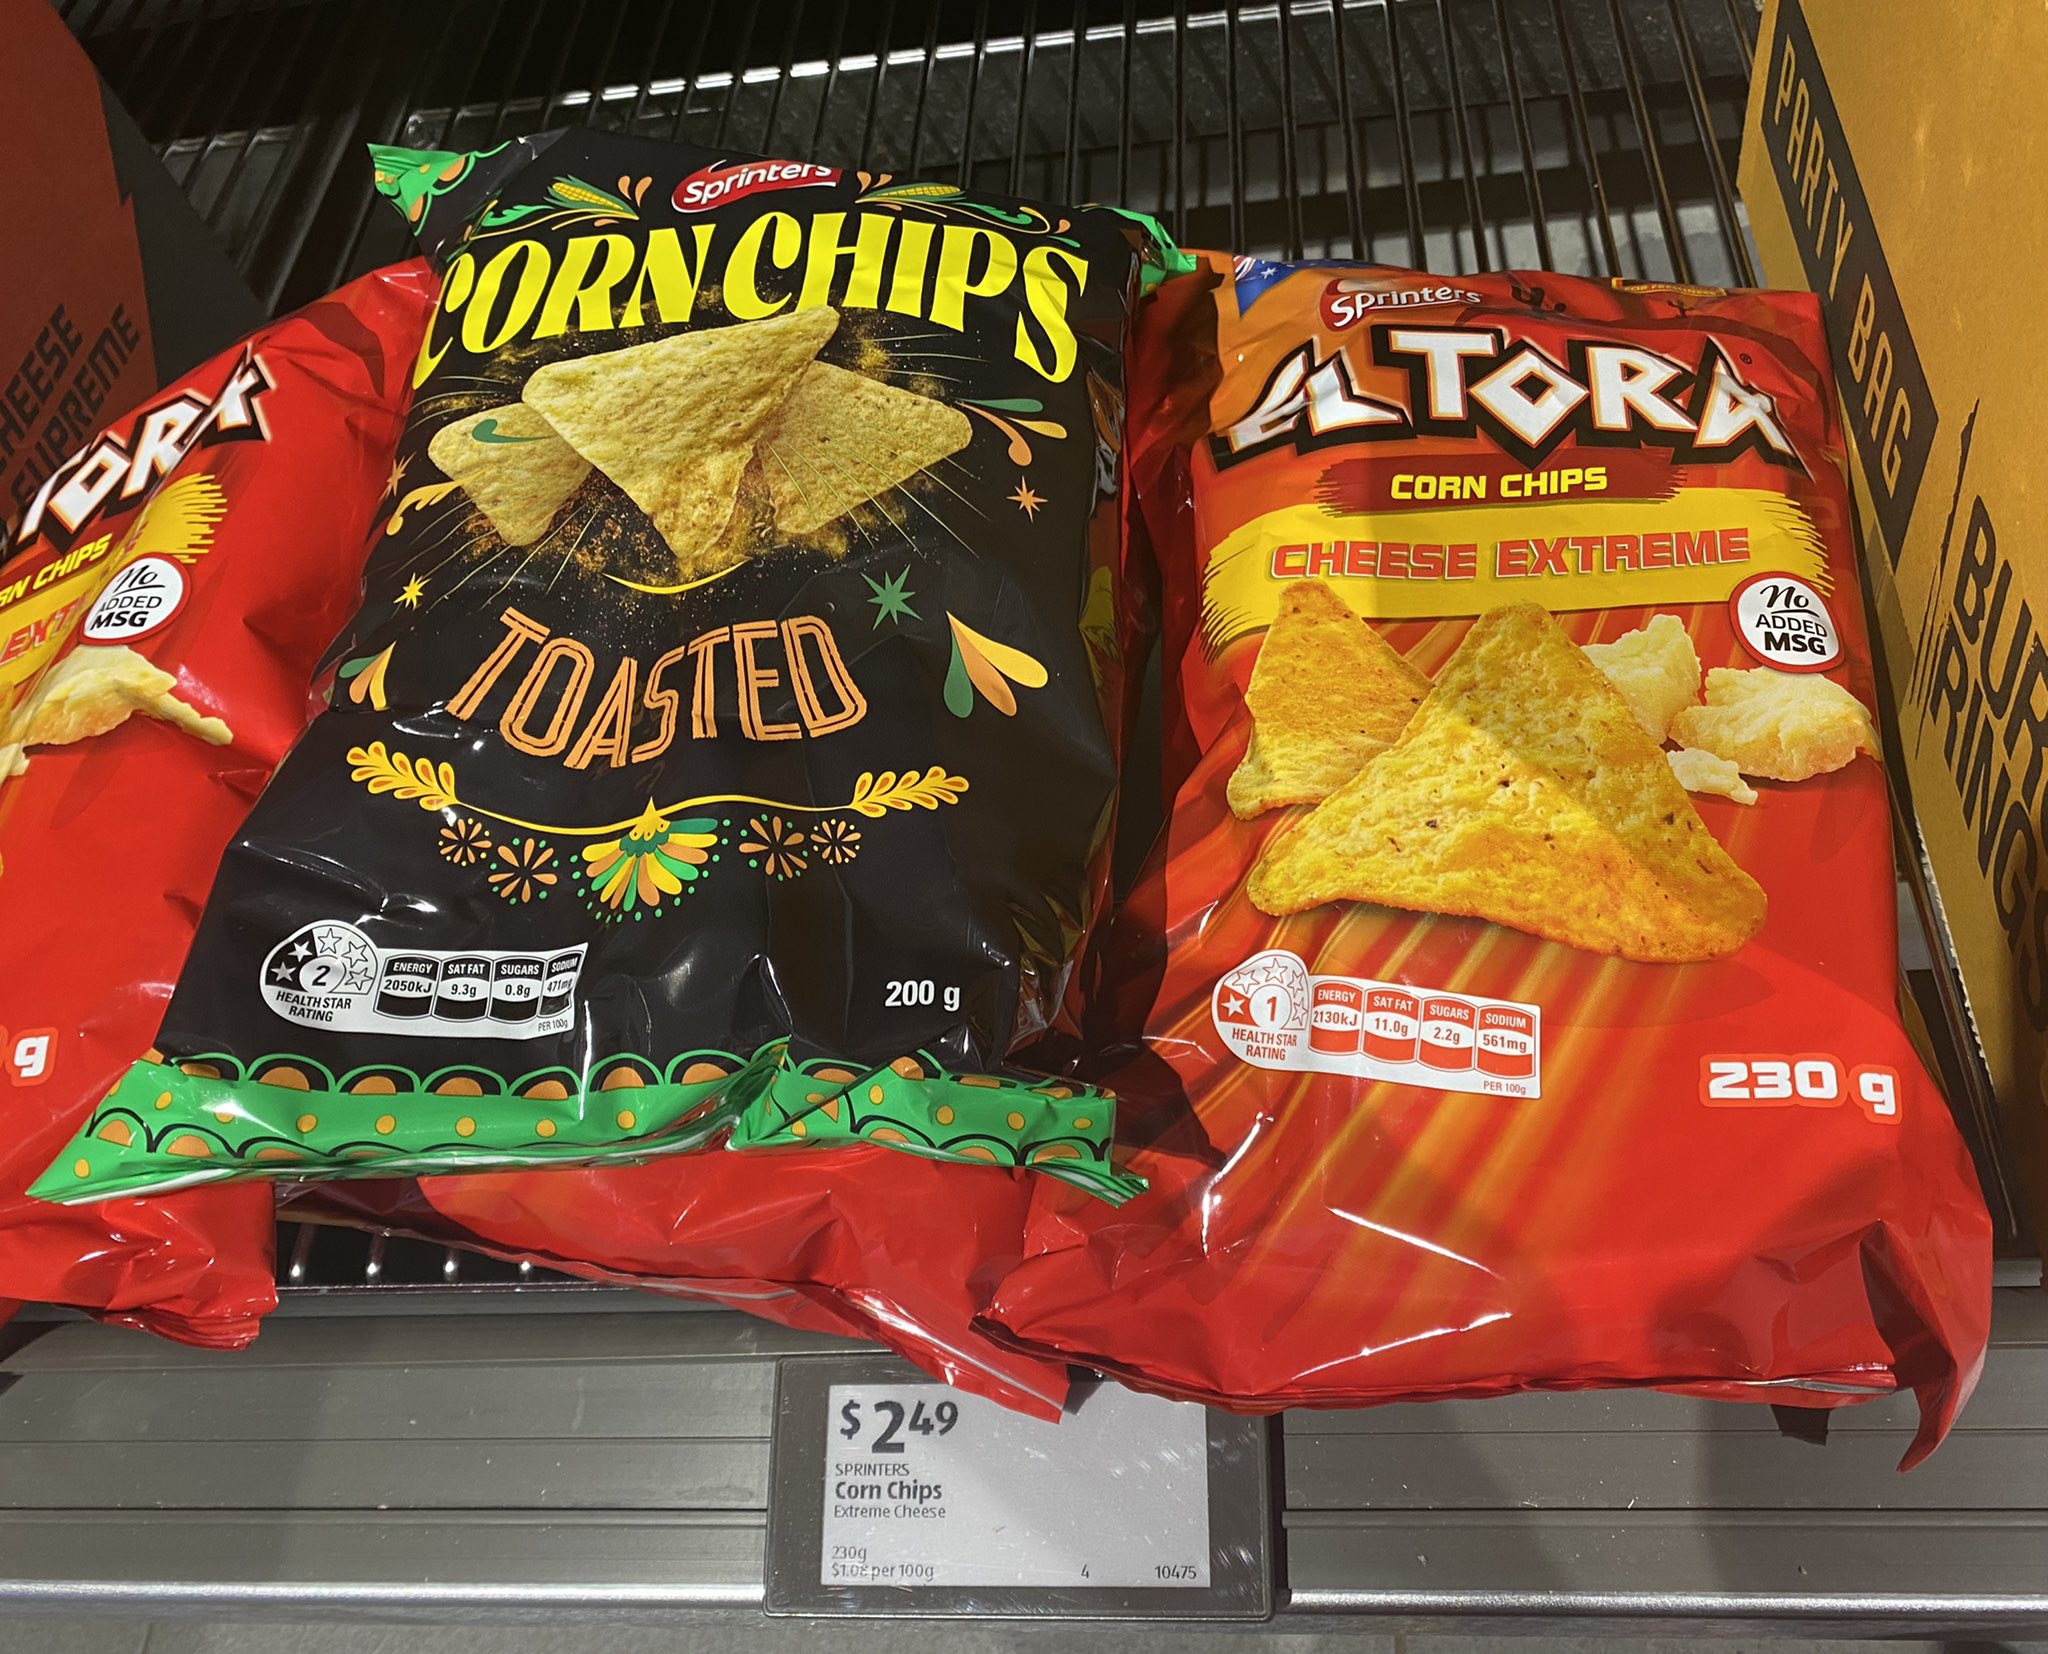 Angie Jones on X: @clowndownunder @ALDIAustralia is pulling this one too.  Changes the packaging of corn chips and charges the same price for 30g less  product.  / X